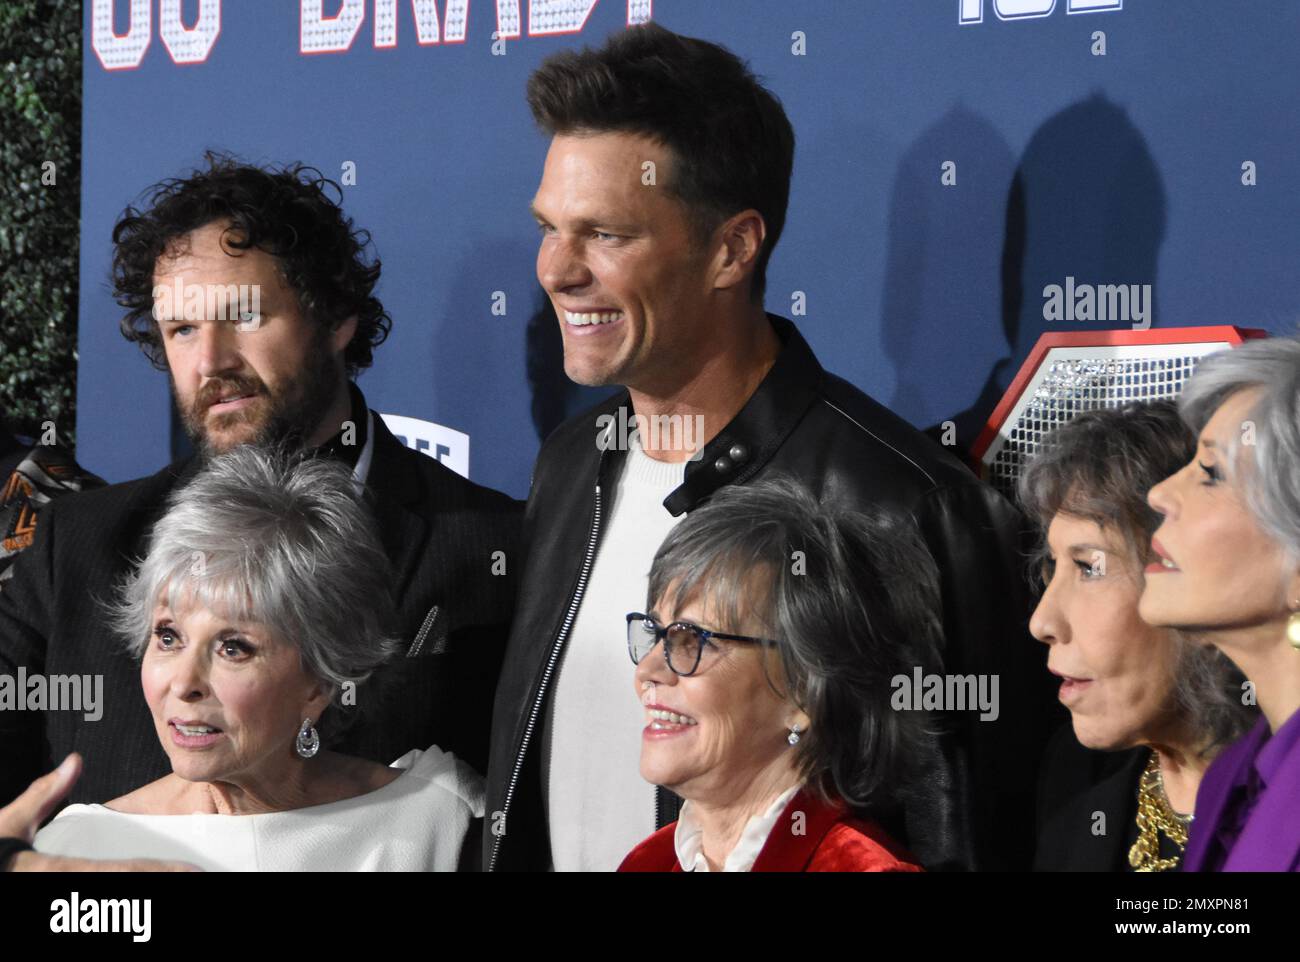 Los Angeles, California, USA 31st January 2023 (L-R) Director Kyle Marvin, Actress Rita Morena, Football Player Tom Brady, Actress Sally Field, Actress Lily Tomlin and Actress Jane Fonda attend the Los Angeles Premiere Screening of Paramount Pictures' '80 for Brady' at Regency Village Theatre on January 31, 2023 in Los Angeles, California, USA. Photo by Barry King/Alamy Stock Photo Stock Photo